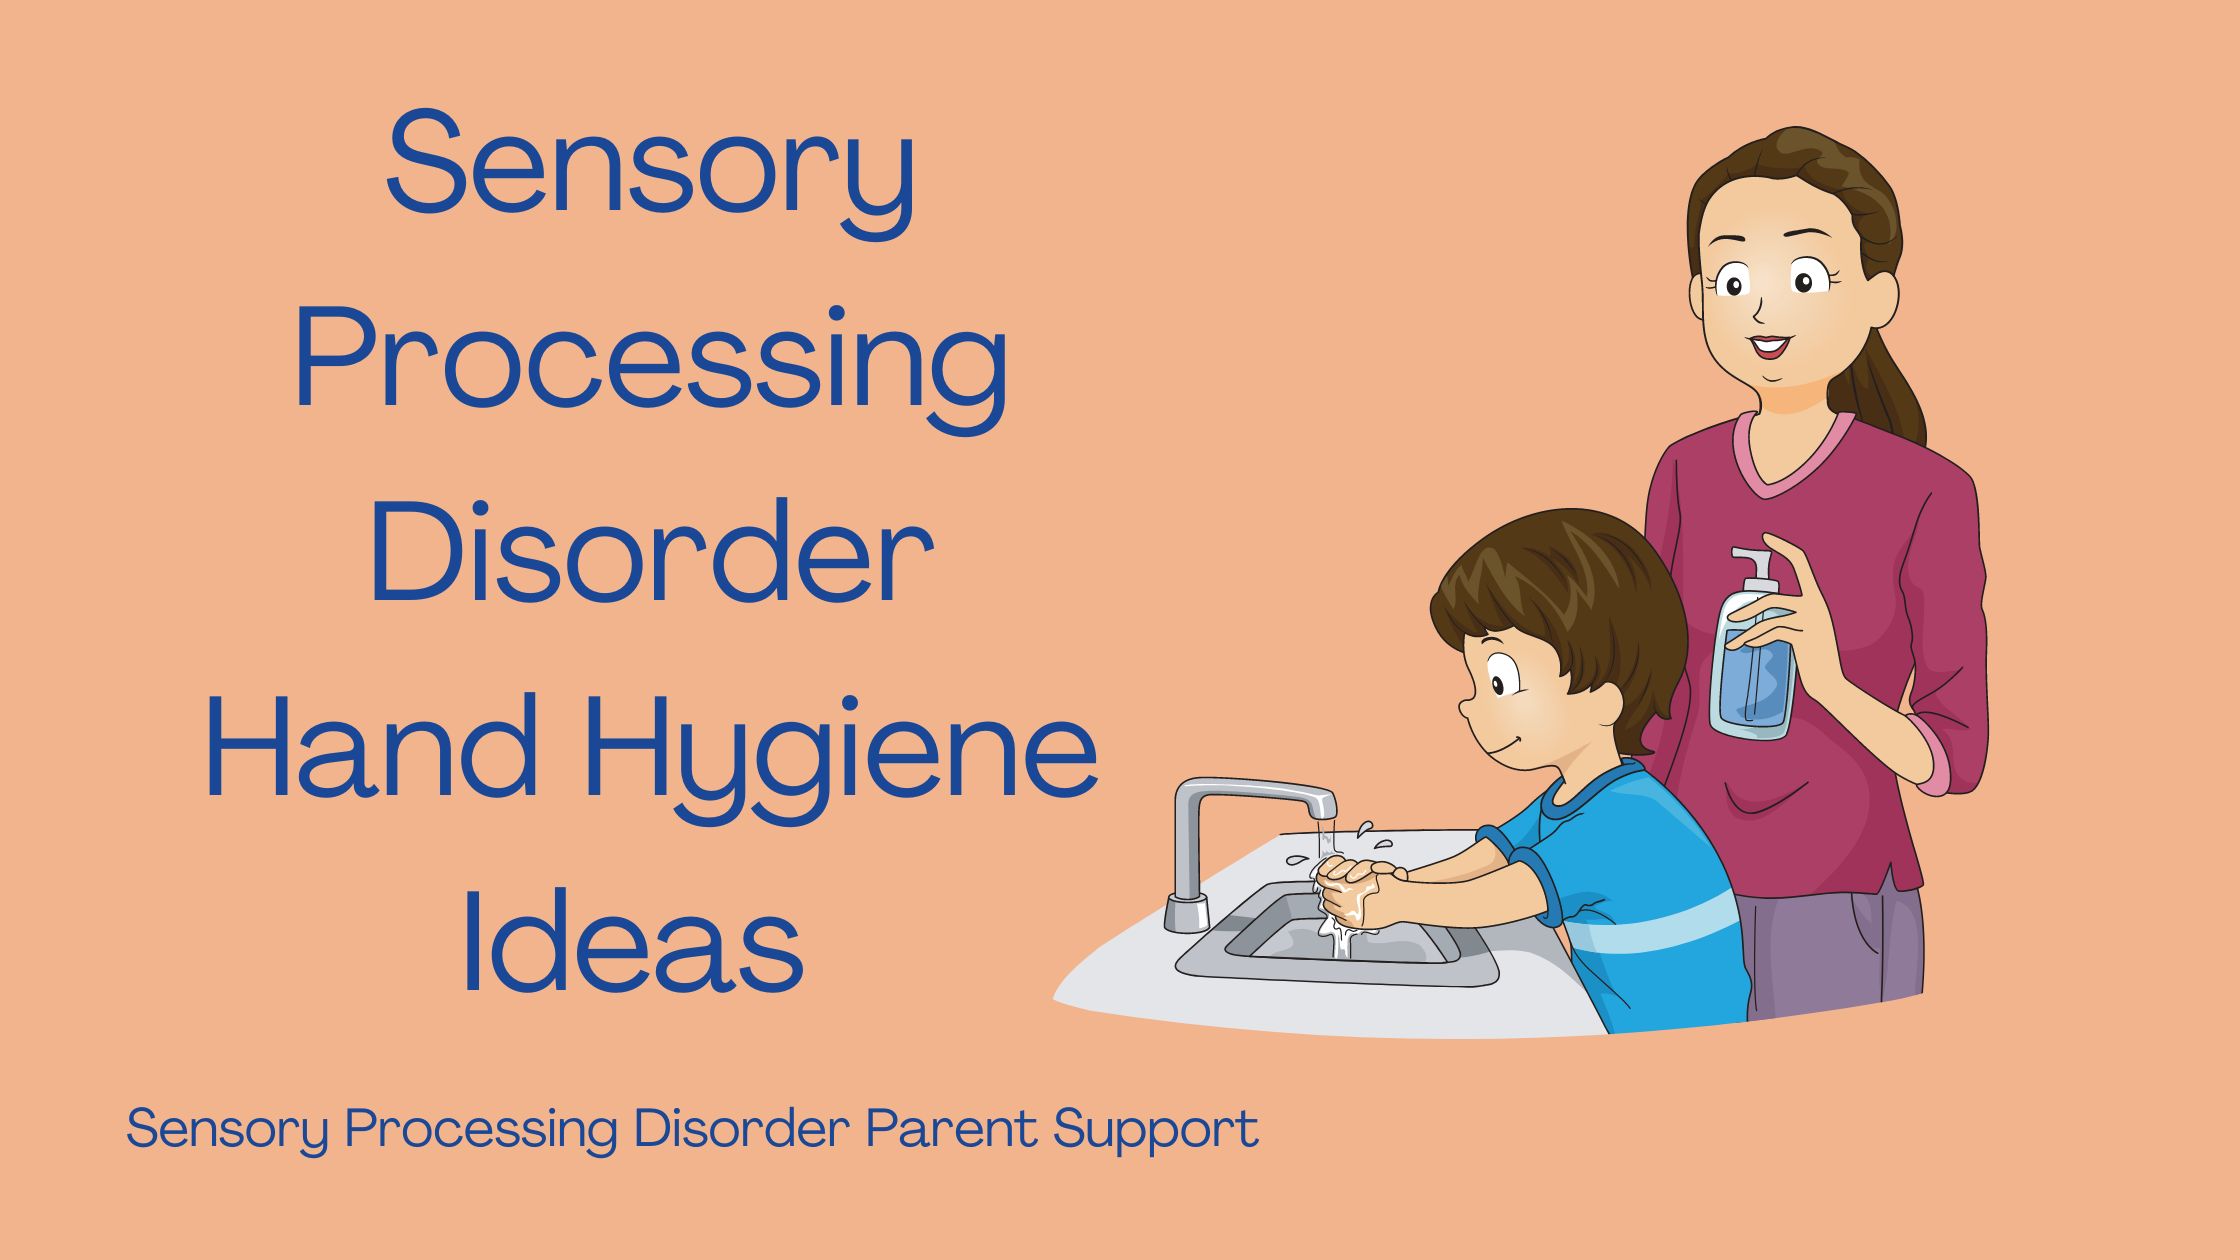 parent helping child wash his hands with soap Sensory Processing Disorder Hand Hygiene Ideas